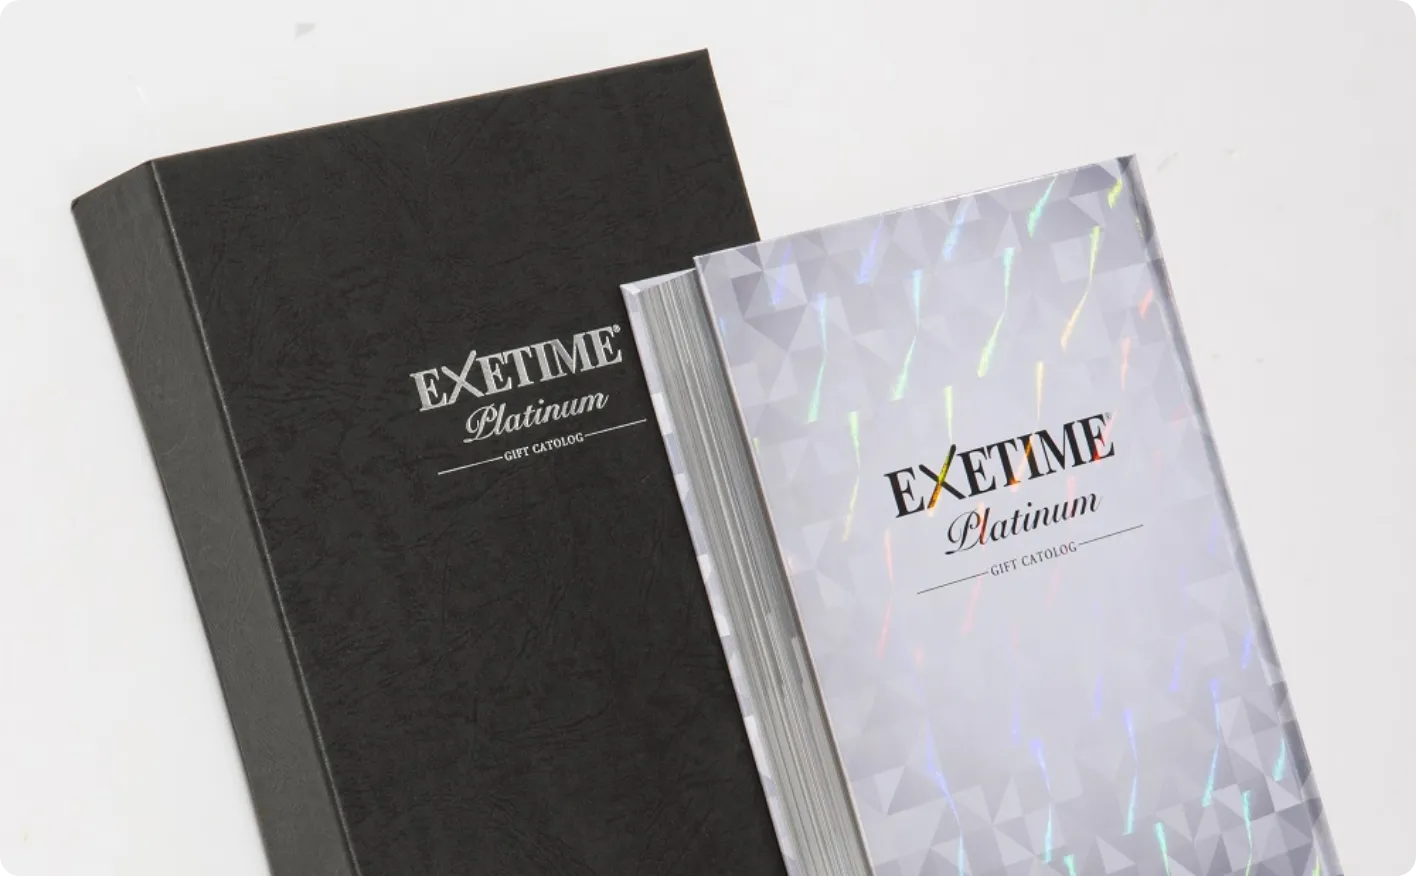 EXETIME